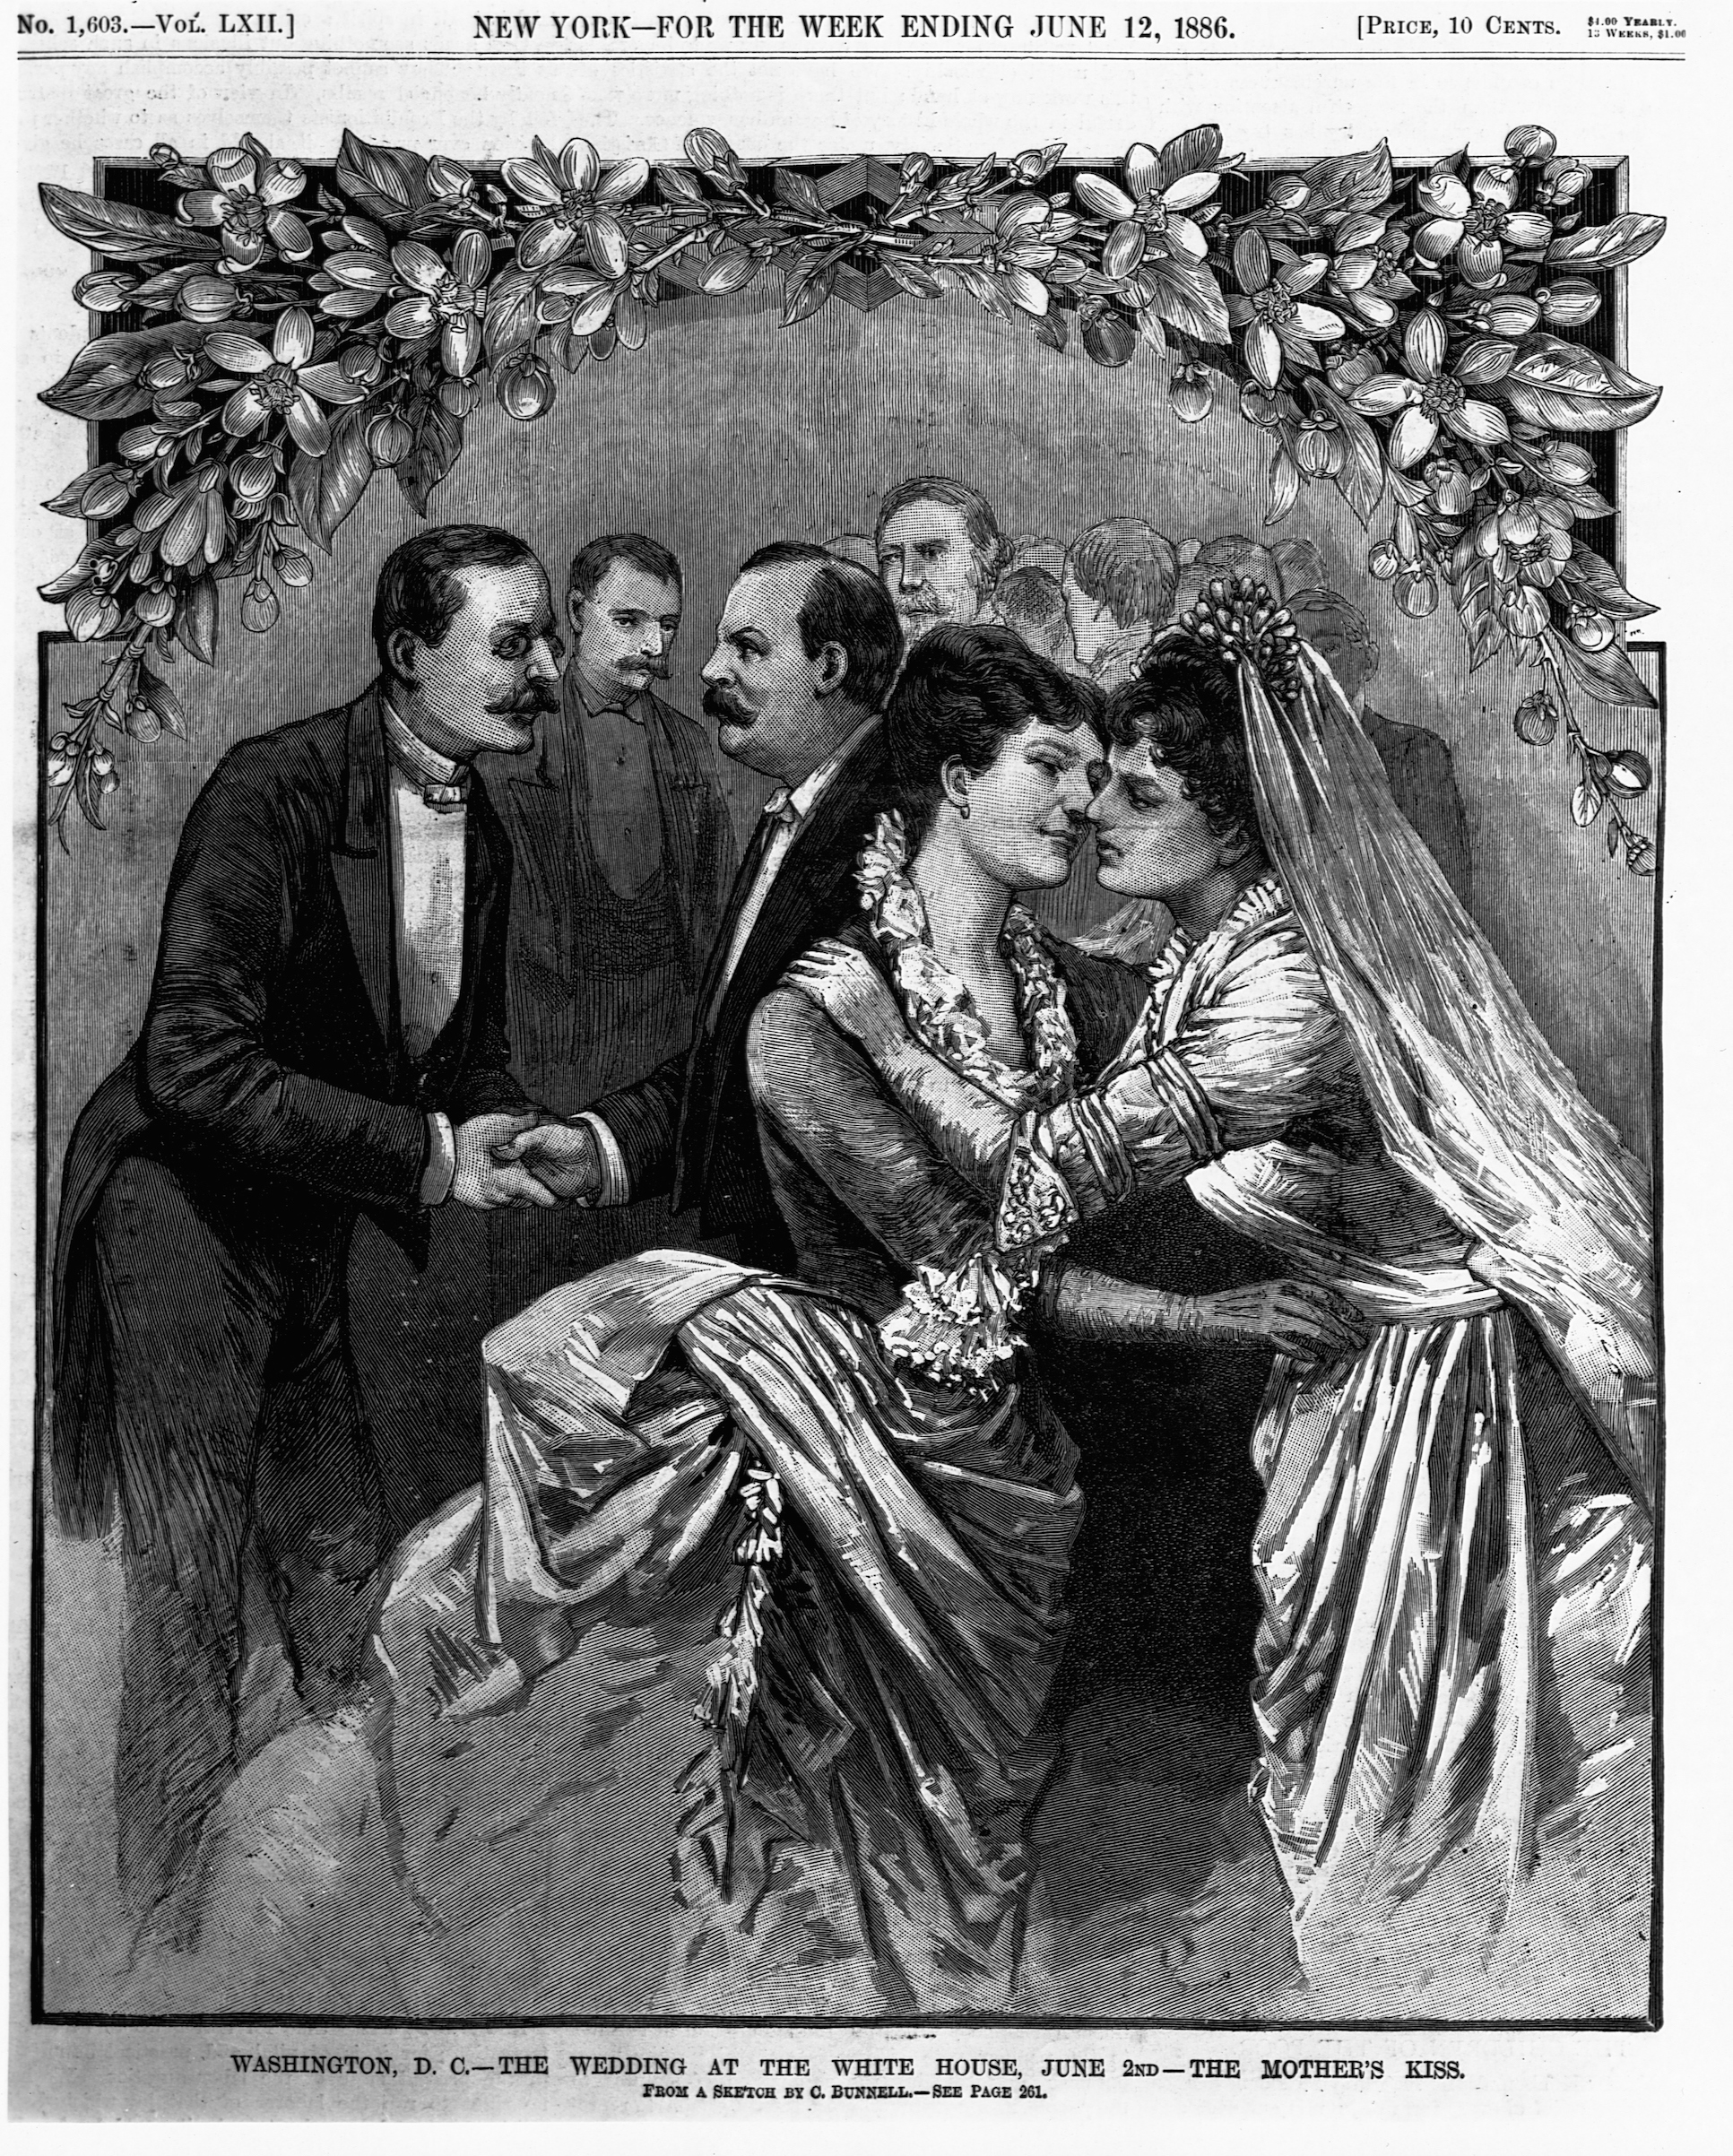 The Wedding at the White House Illustration